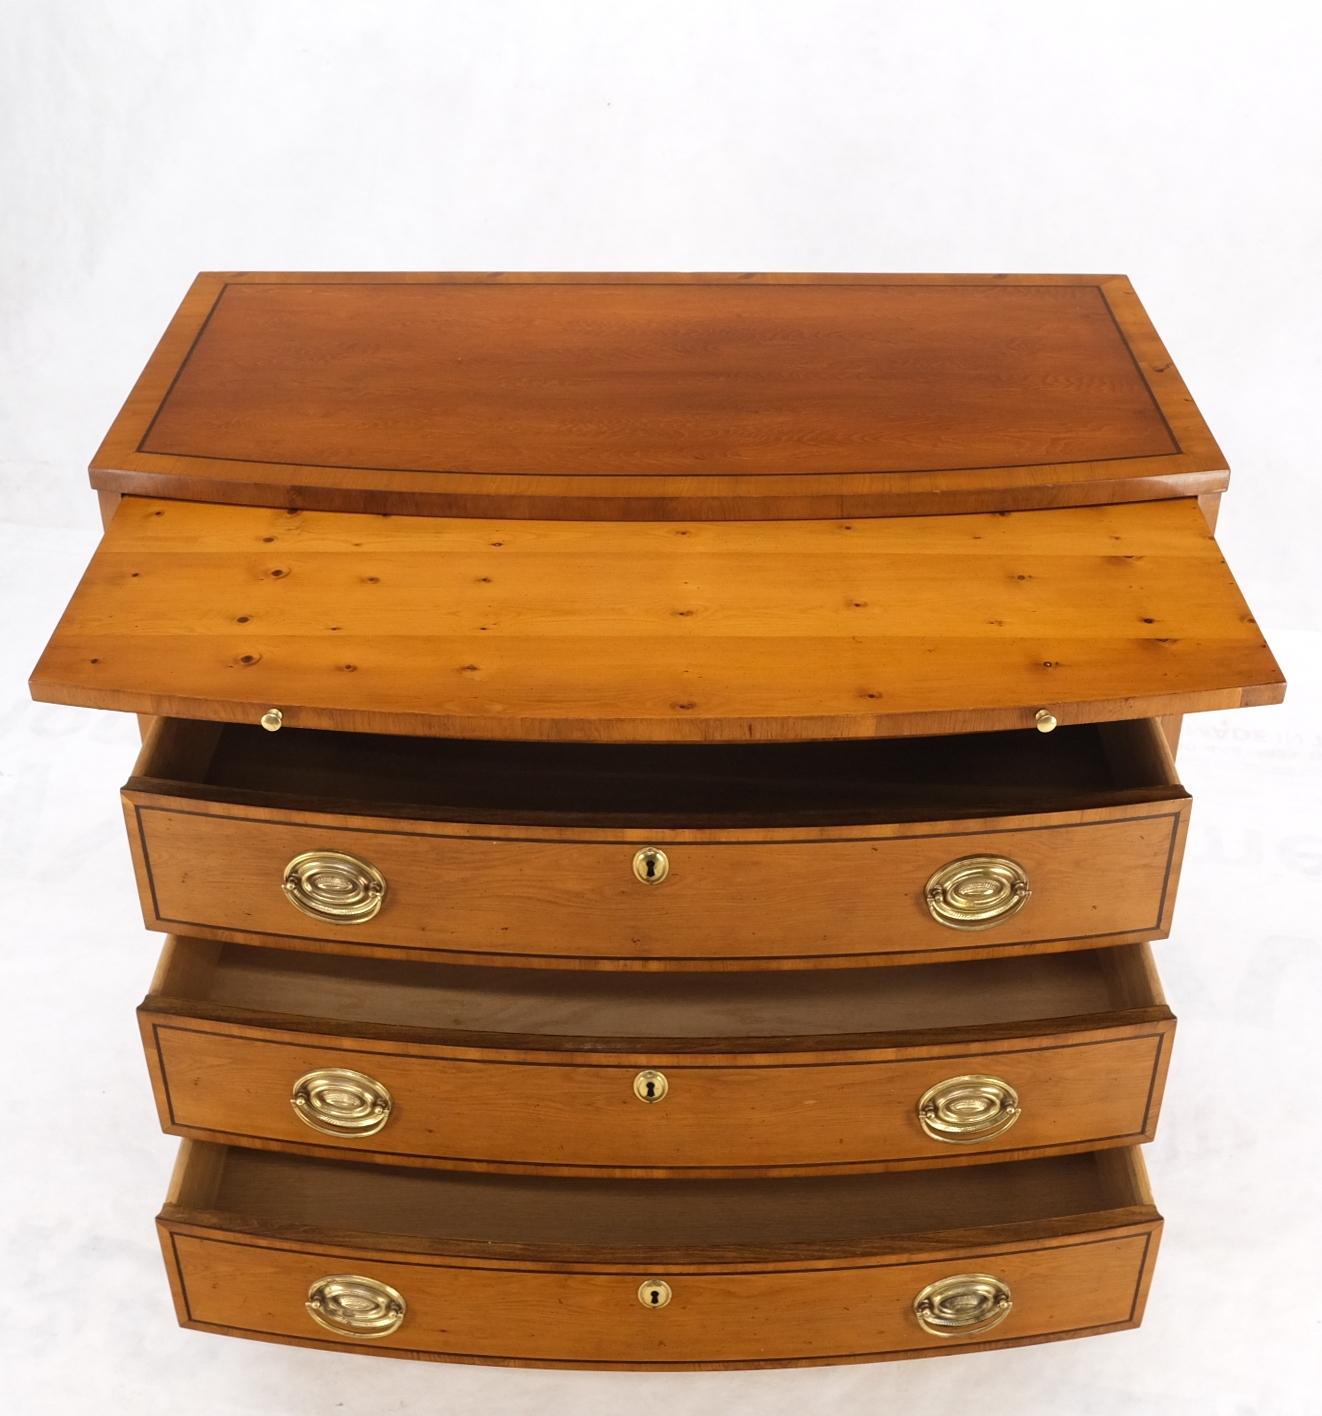 Lacquered Mahogany Bow Front 4 Drawers Pull Out Tray Brass Hardware Bachelor Chest Dresser